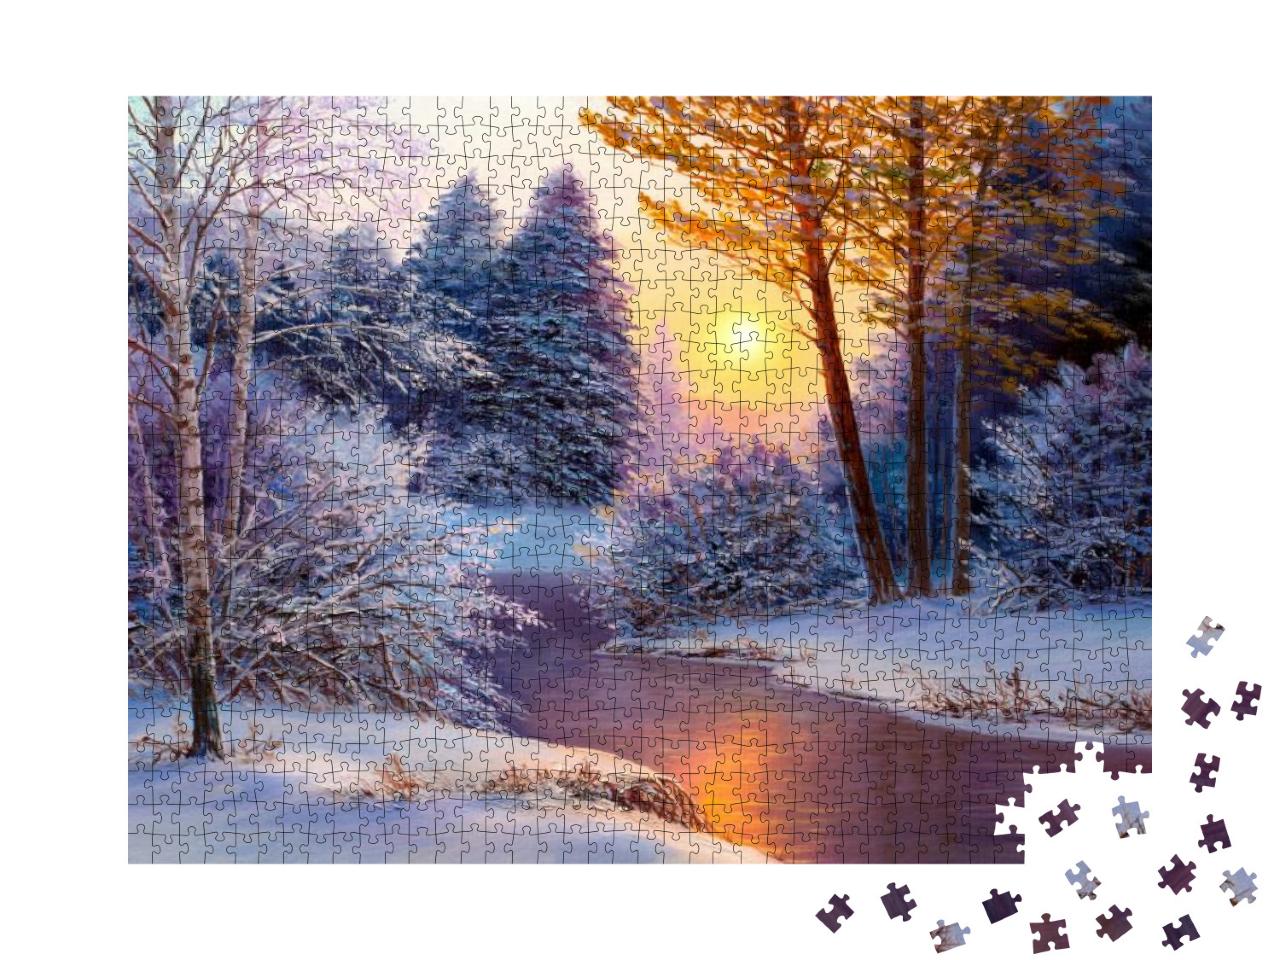 Winter Landscape with the River. Original Oil Painting... Jigsaw Puzzle with 1000 pieces